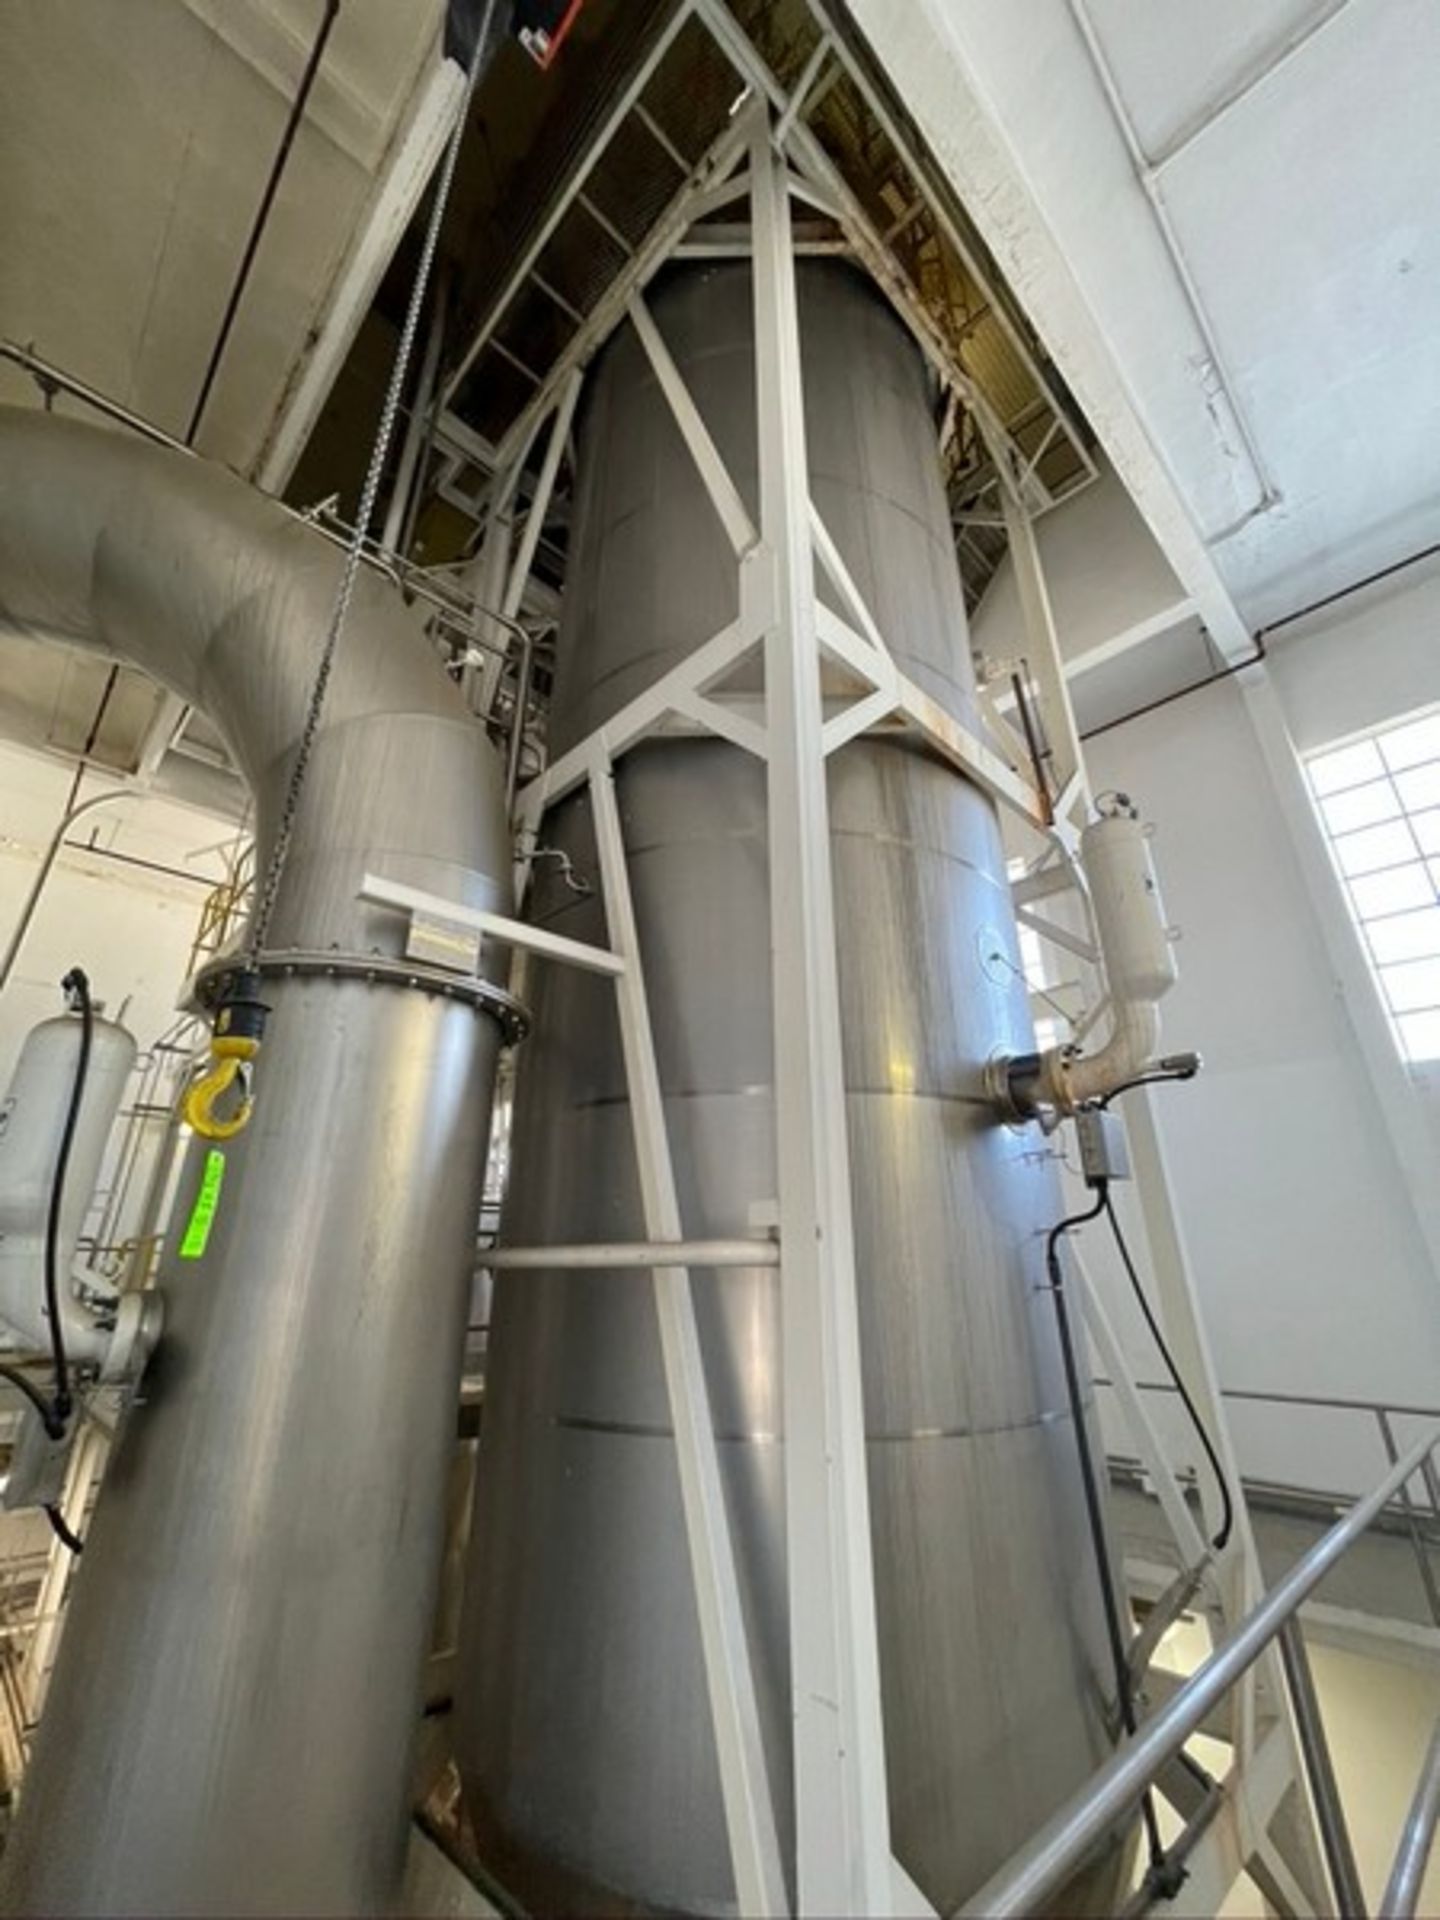 GEA NIRO BSI Approx. 40 ft H x 10 ft W S/S Tower Dryer with Natural Gas Burner, Associated Duct - Image 40 of 47